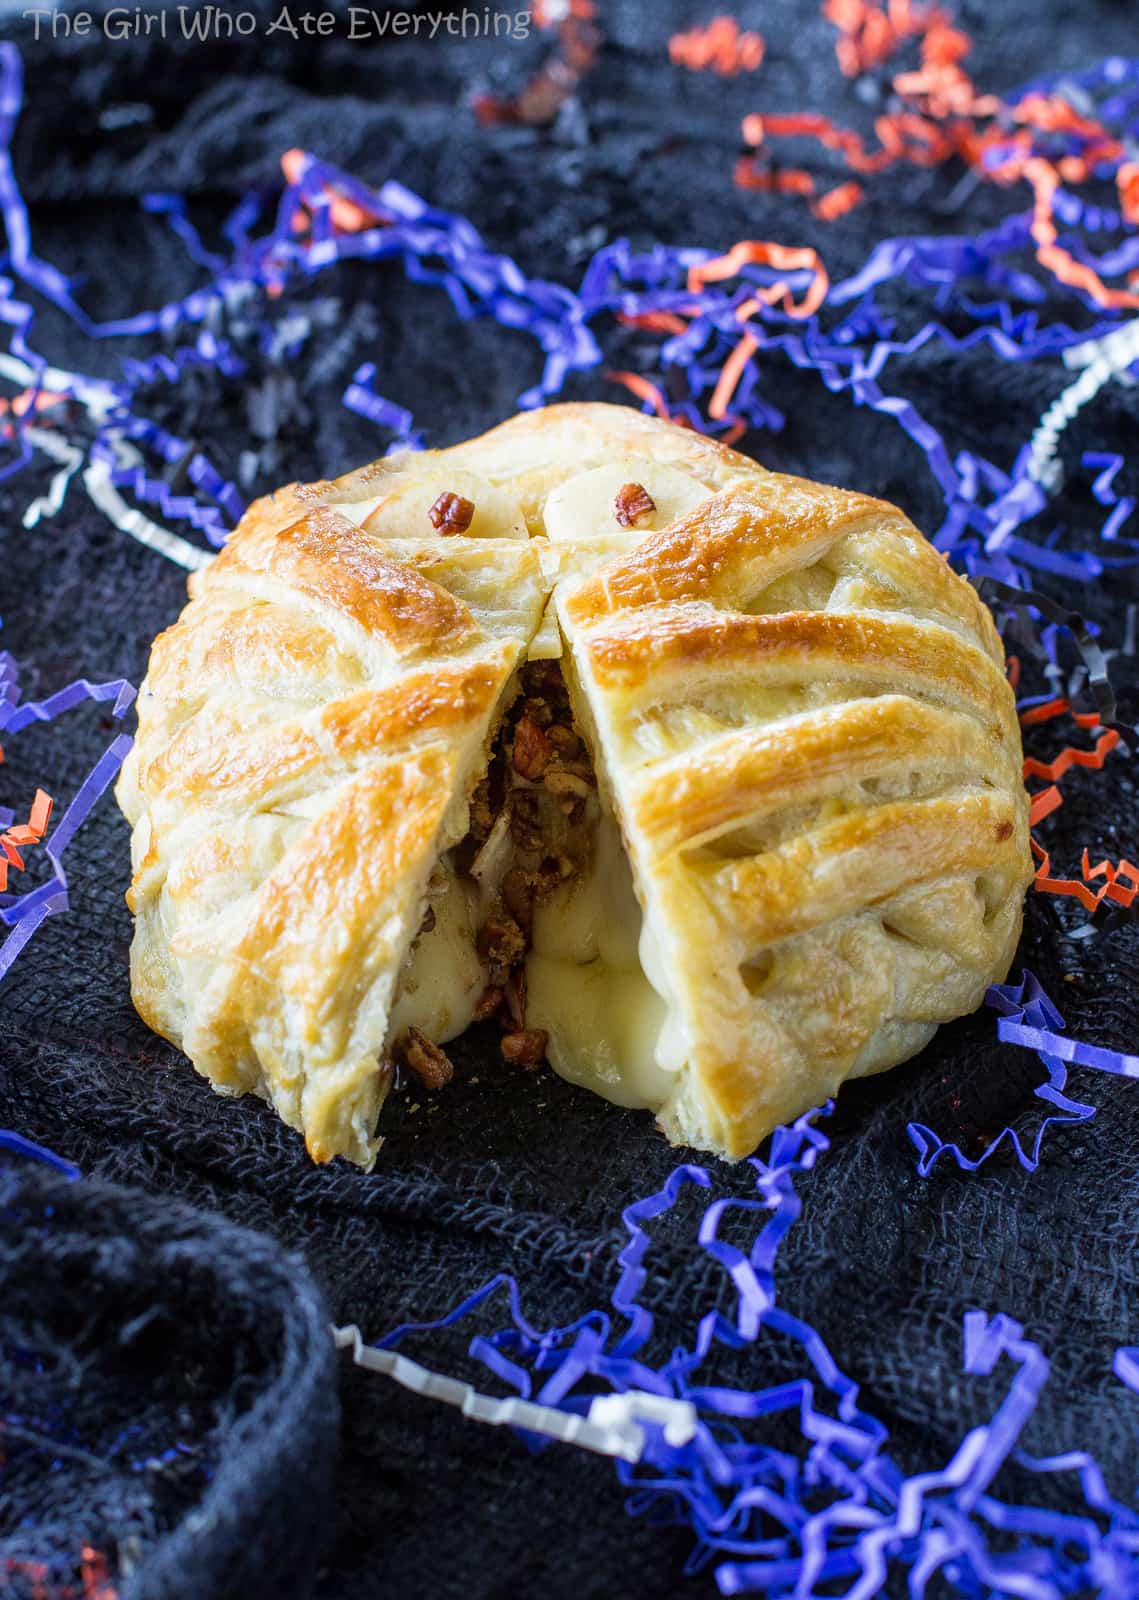 Mummy Wrapped Brie - topped with brown sugar and cinnamon pecans, baked inside puff pastry until nice and gooey. The best appetizer for Halloween! the-girl-who-ate-everything.com